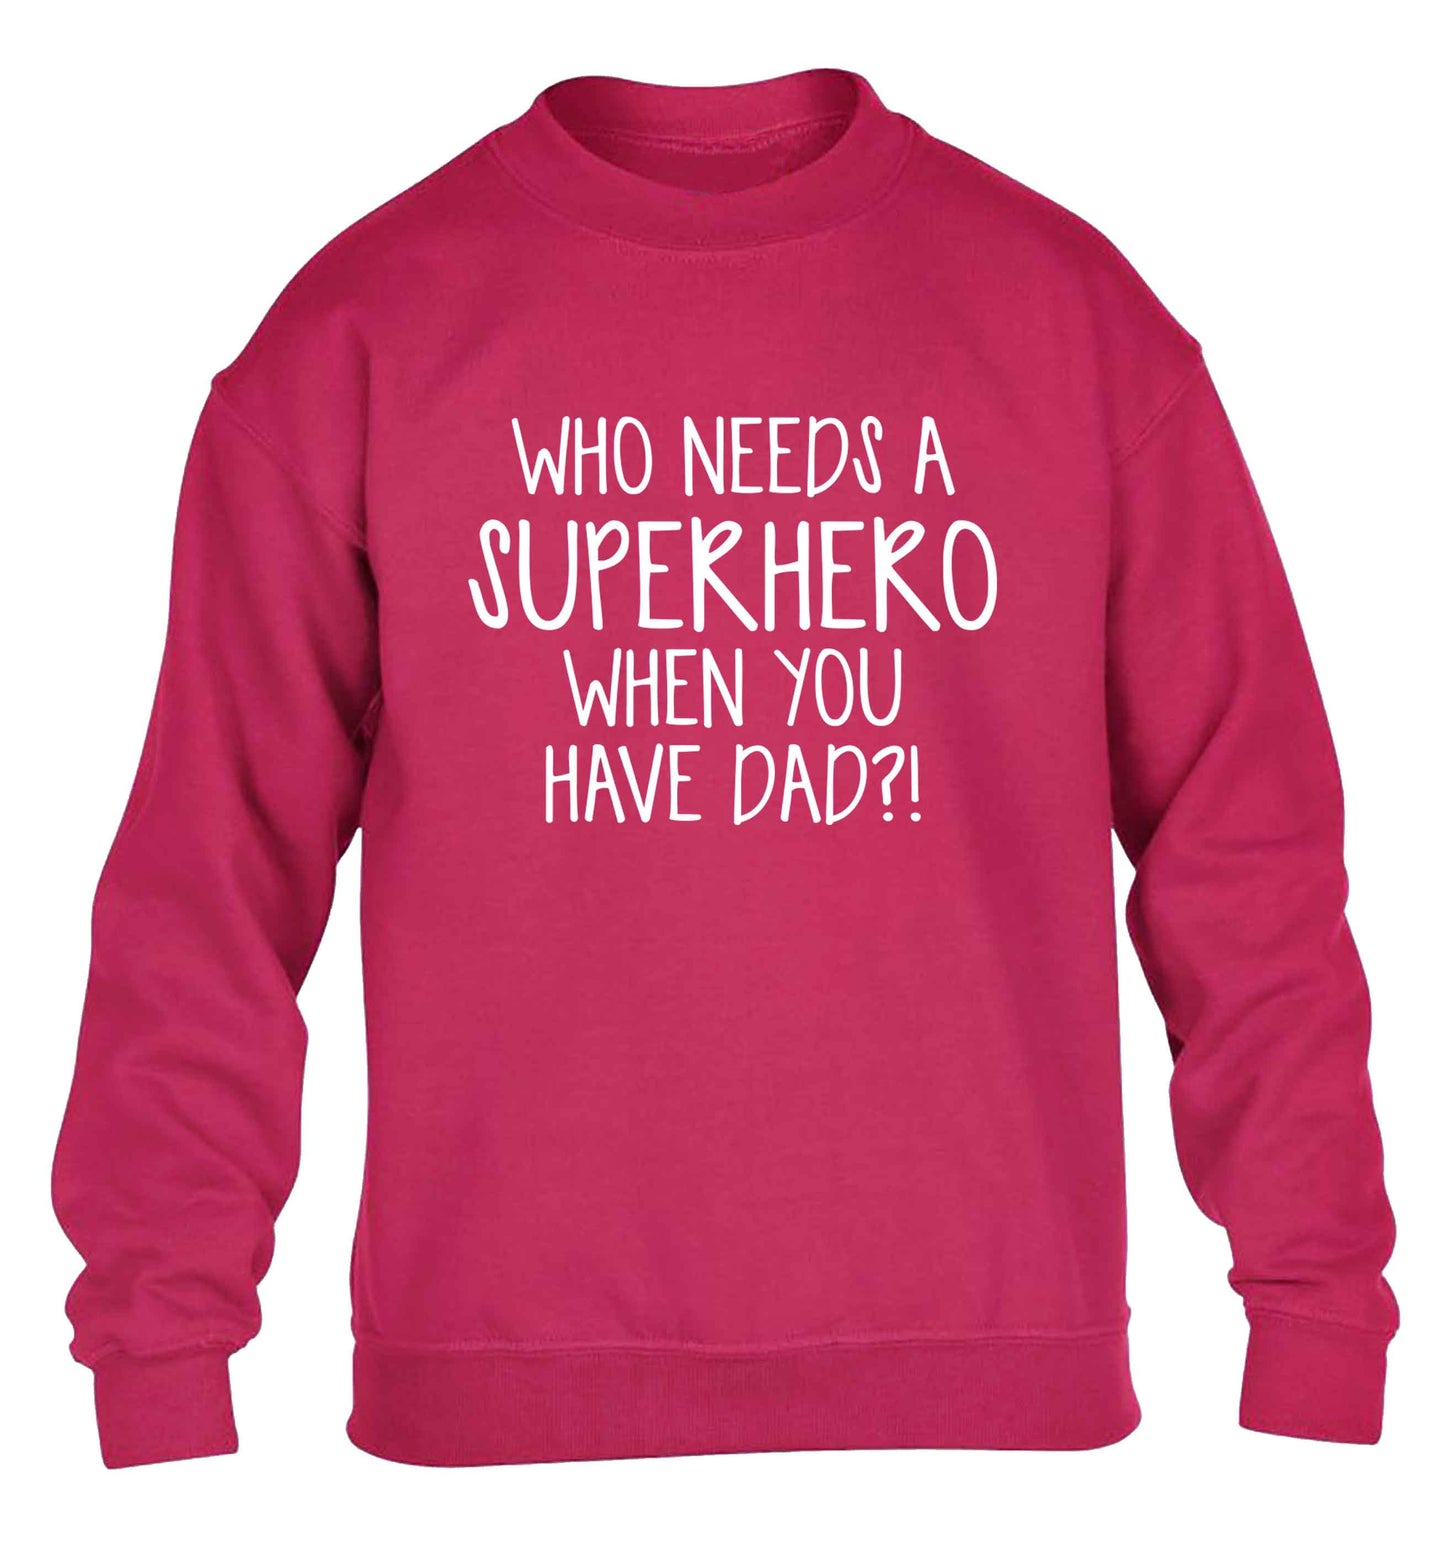 Who needs a superhero when you have dad! children's pink sweater 12-13 Years